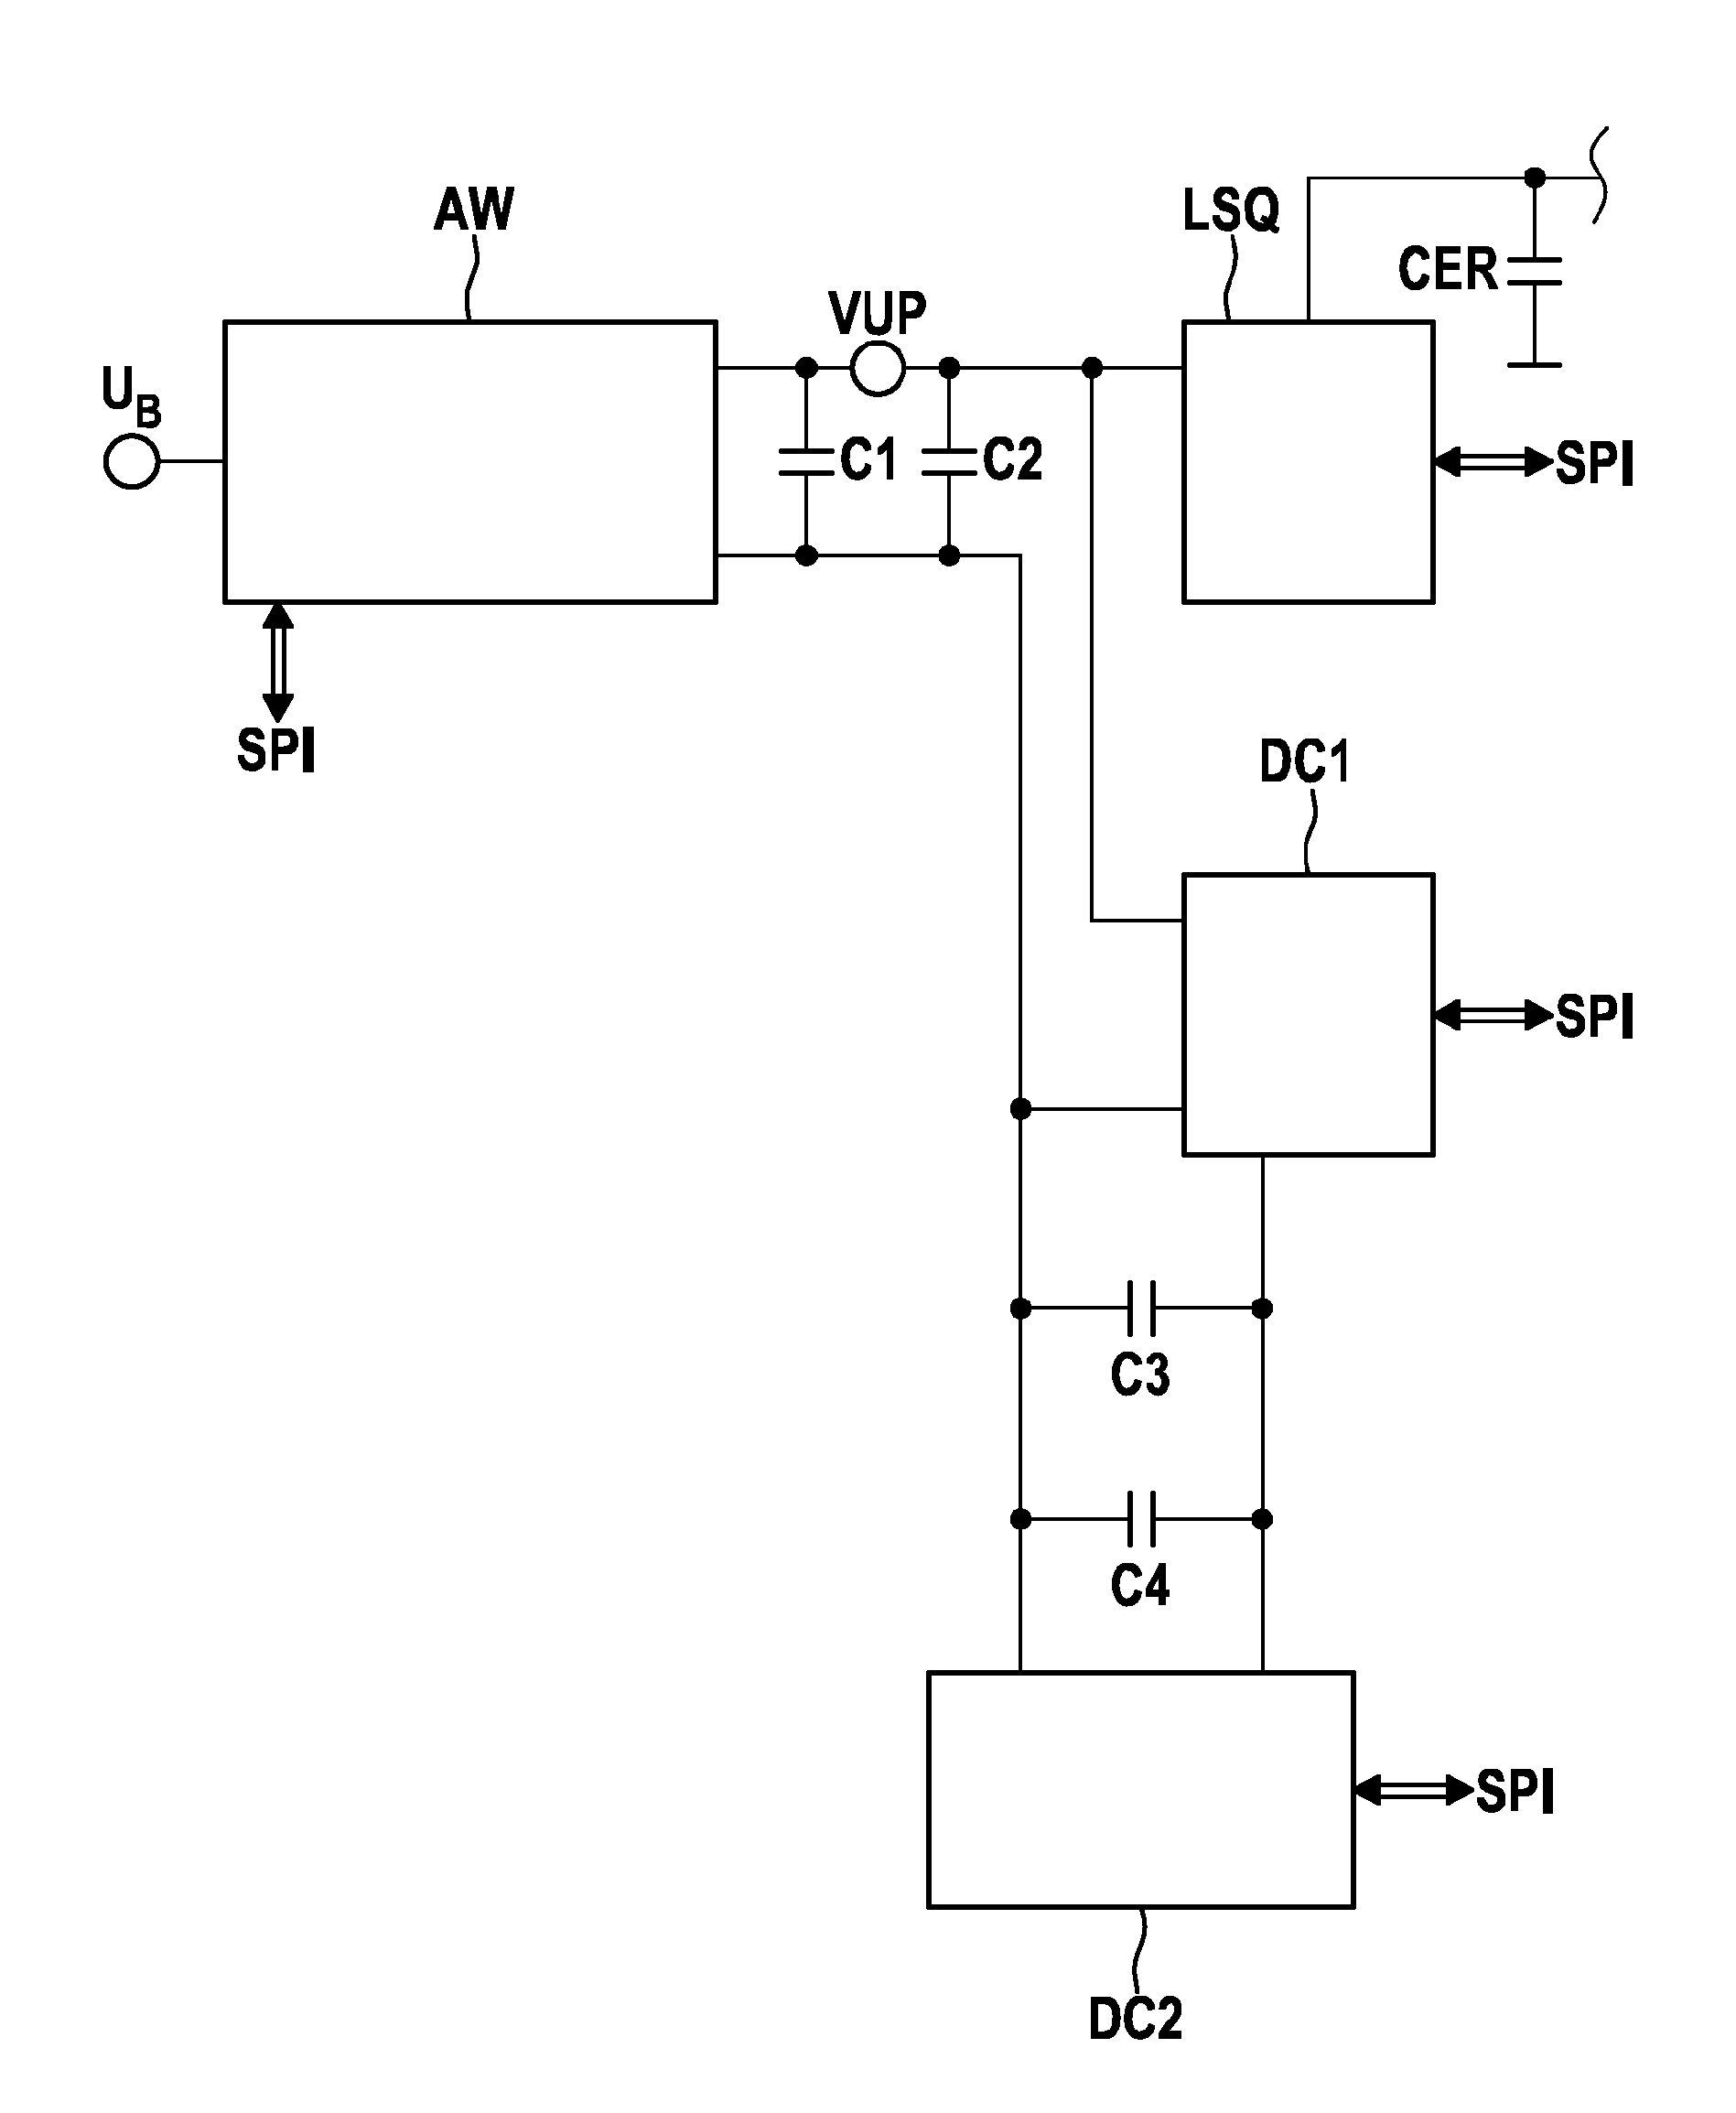 Control unit for operating a safety system for a vehicle and method for operating such a safety system for a vehicle